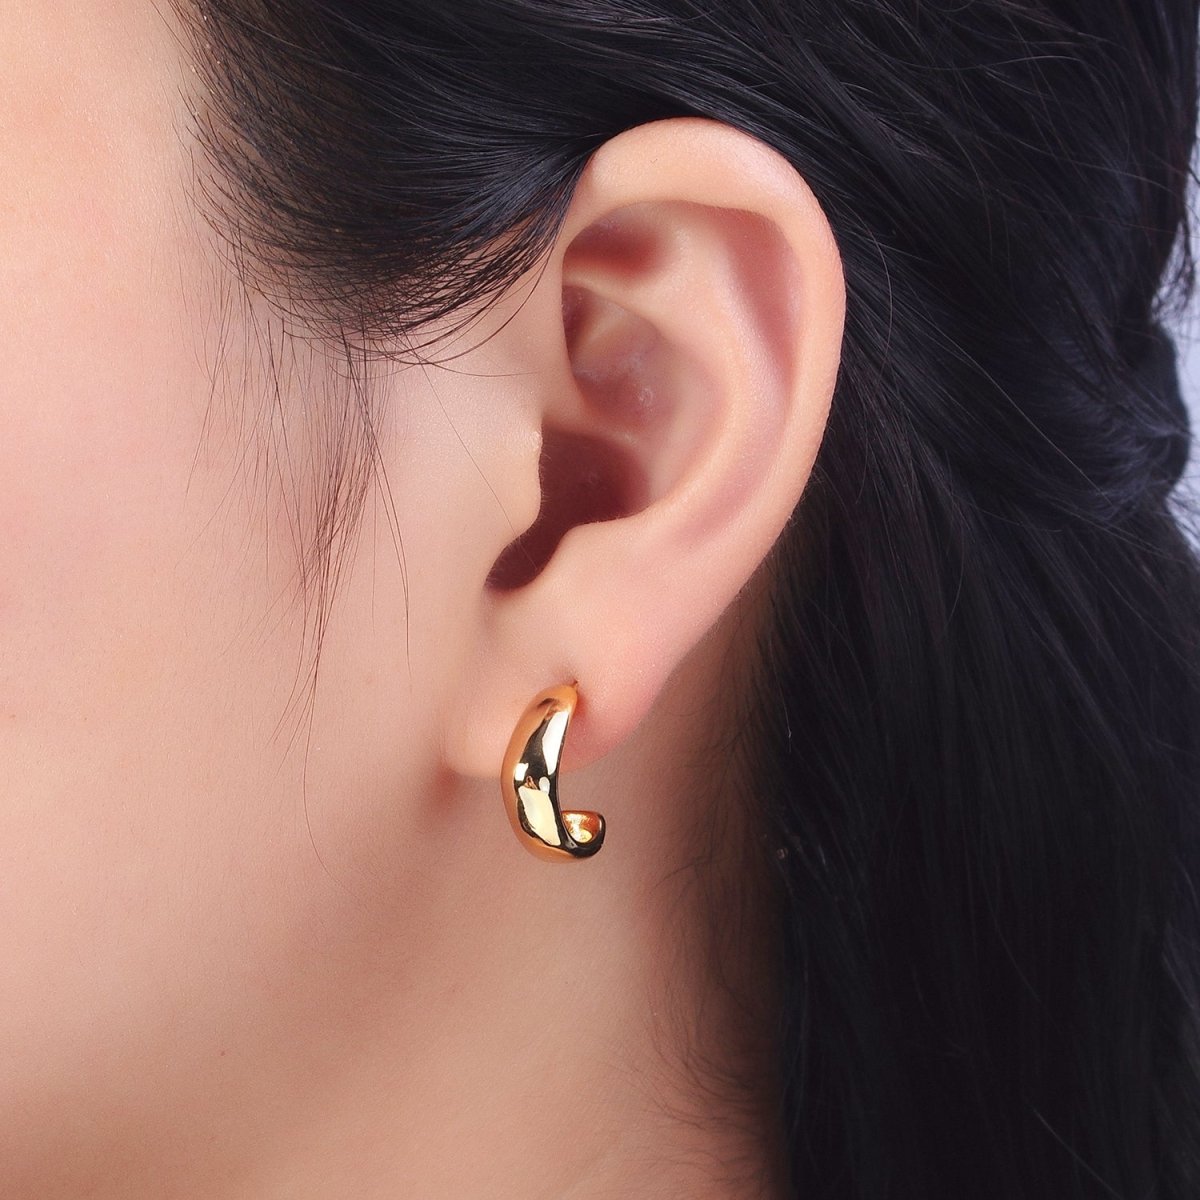 Geometric Abstract Gold Curved Stud Hoops Earrings | AB021 - DLUXCA